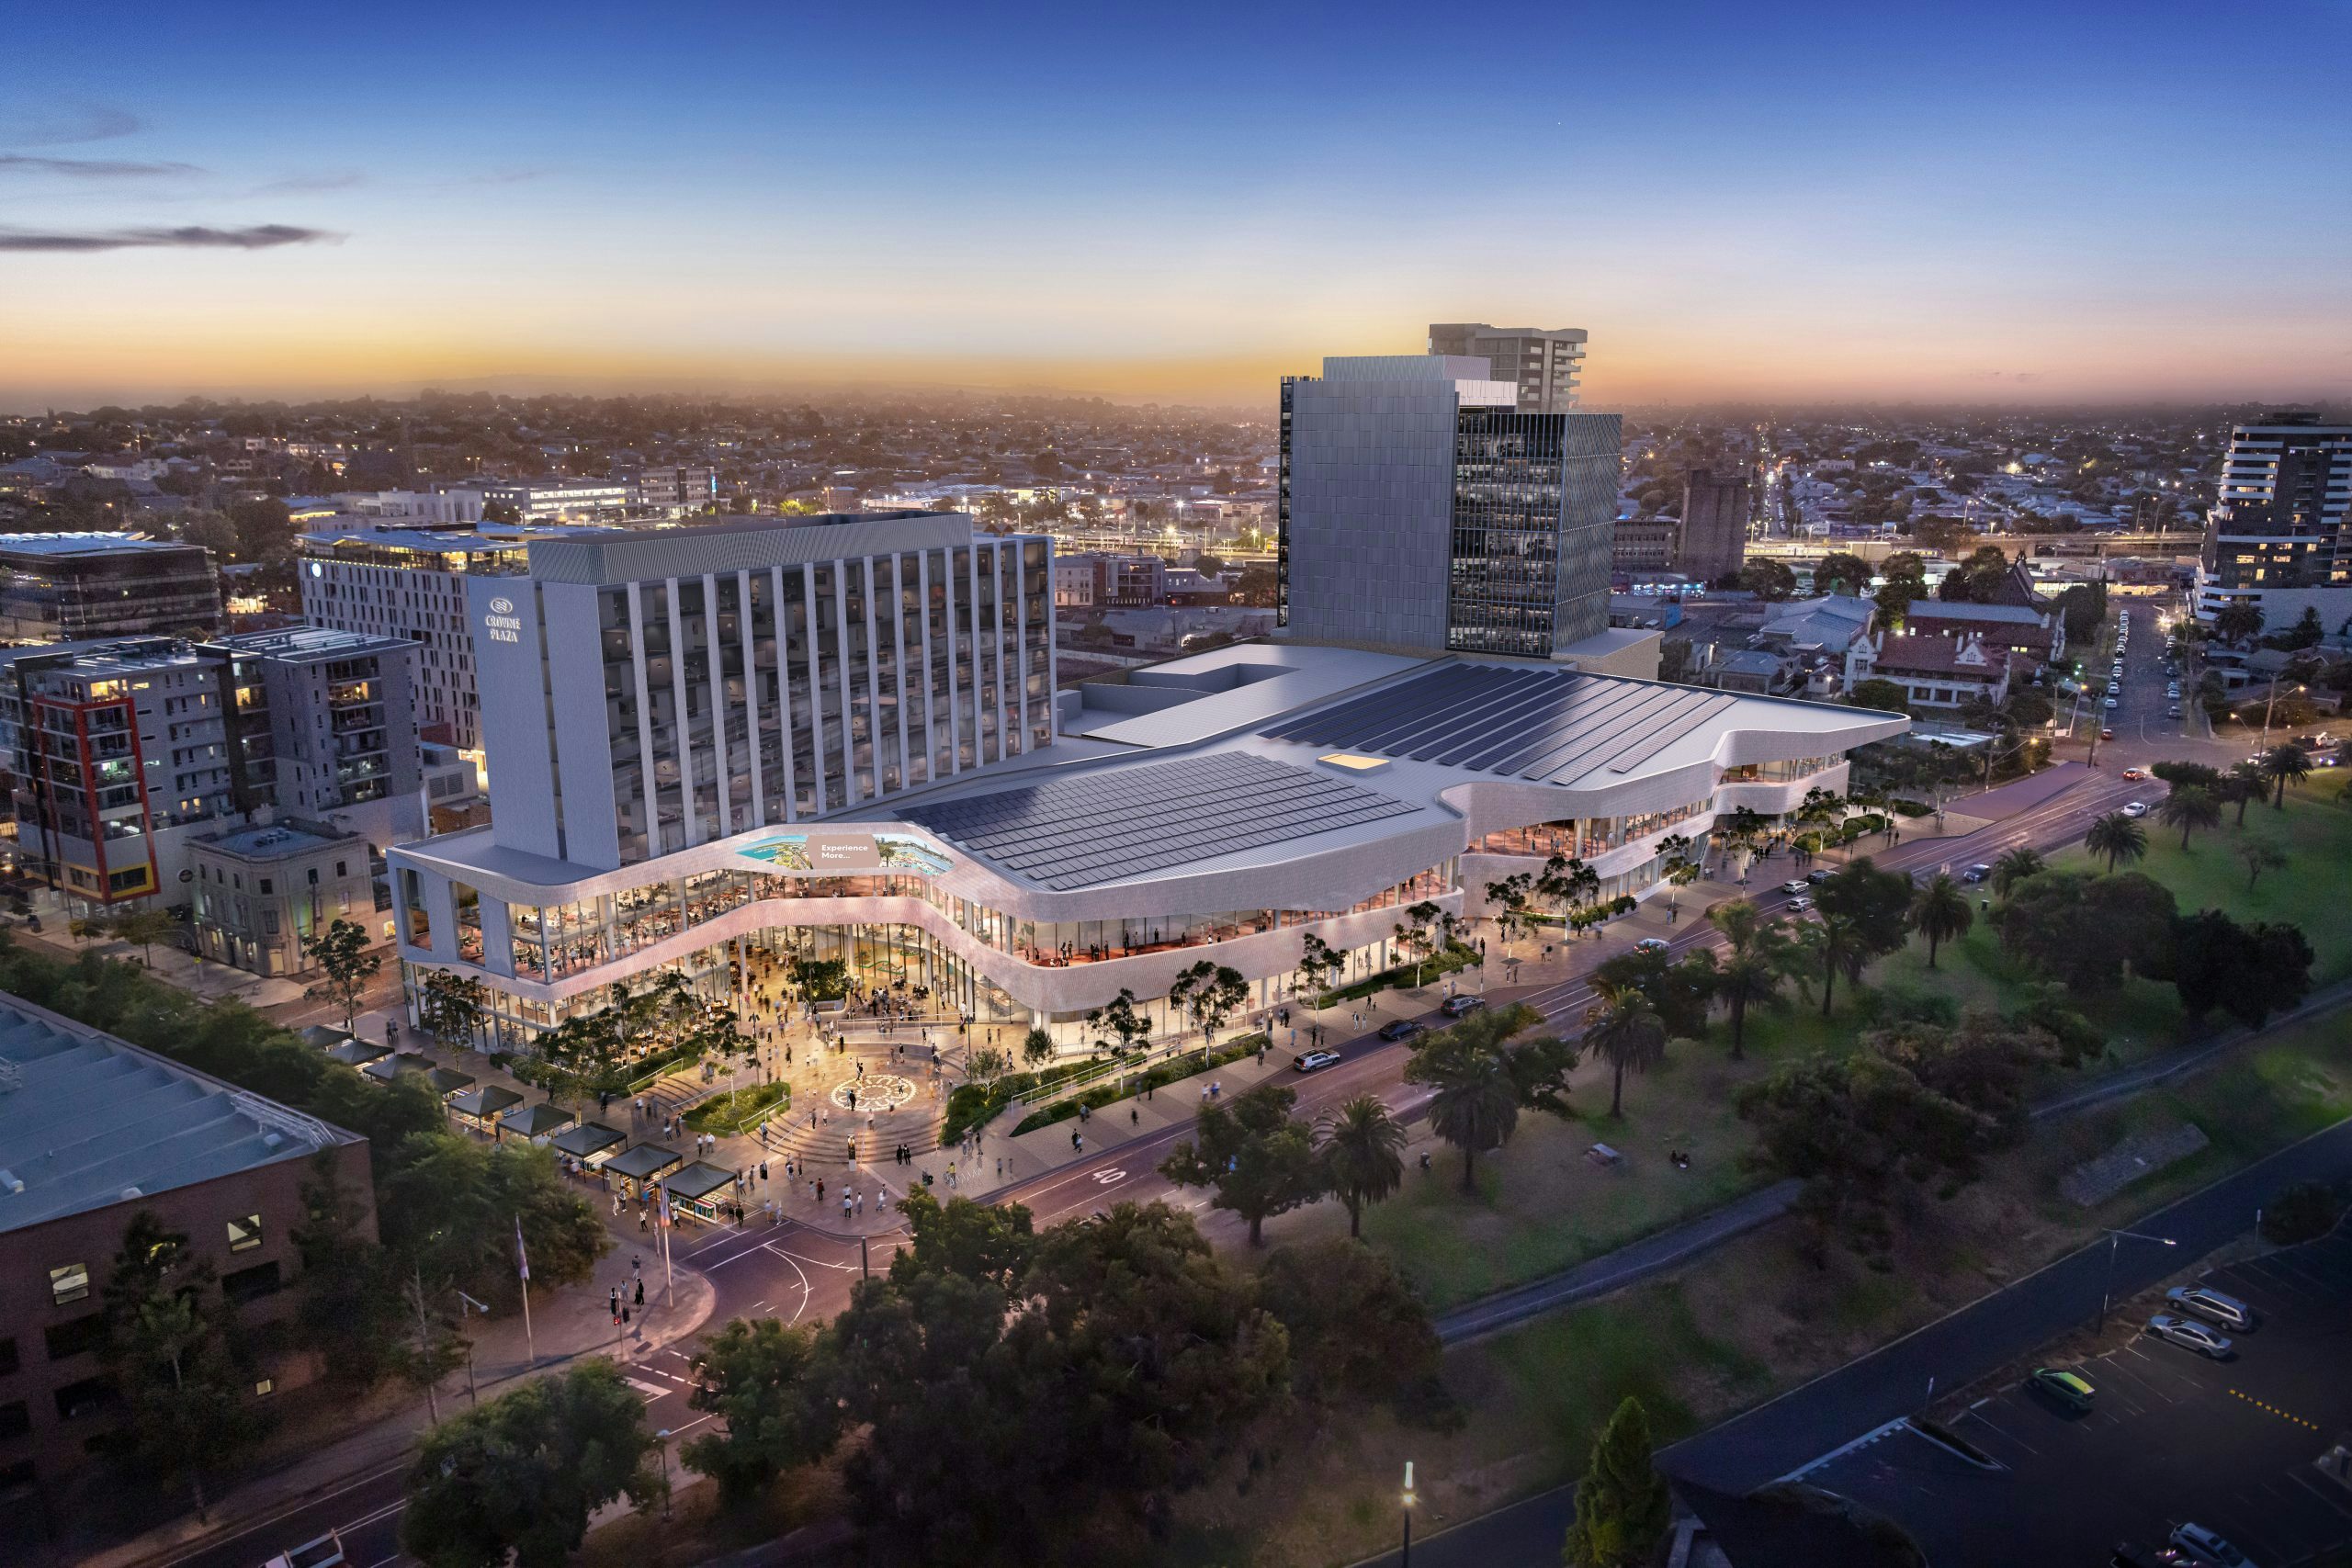 Plenary Conventions preferred for Geelong’s new convention centre precinct image